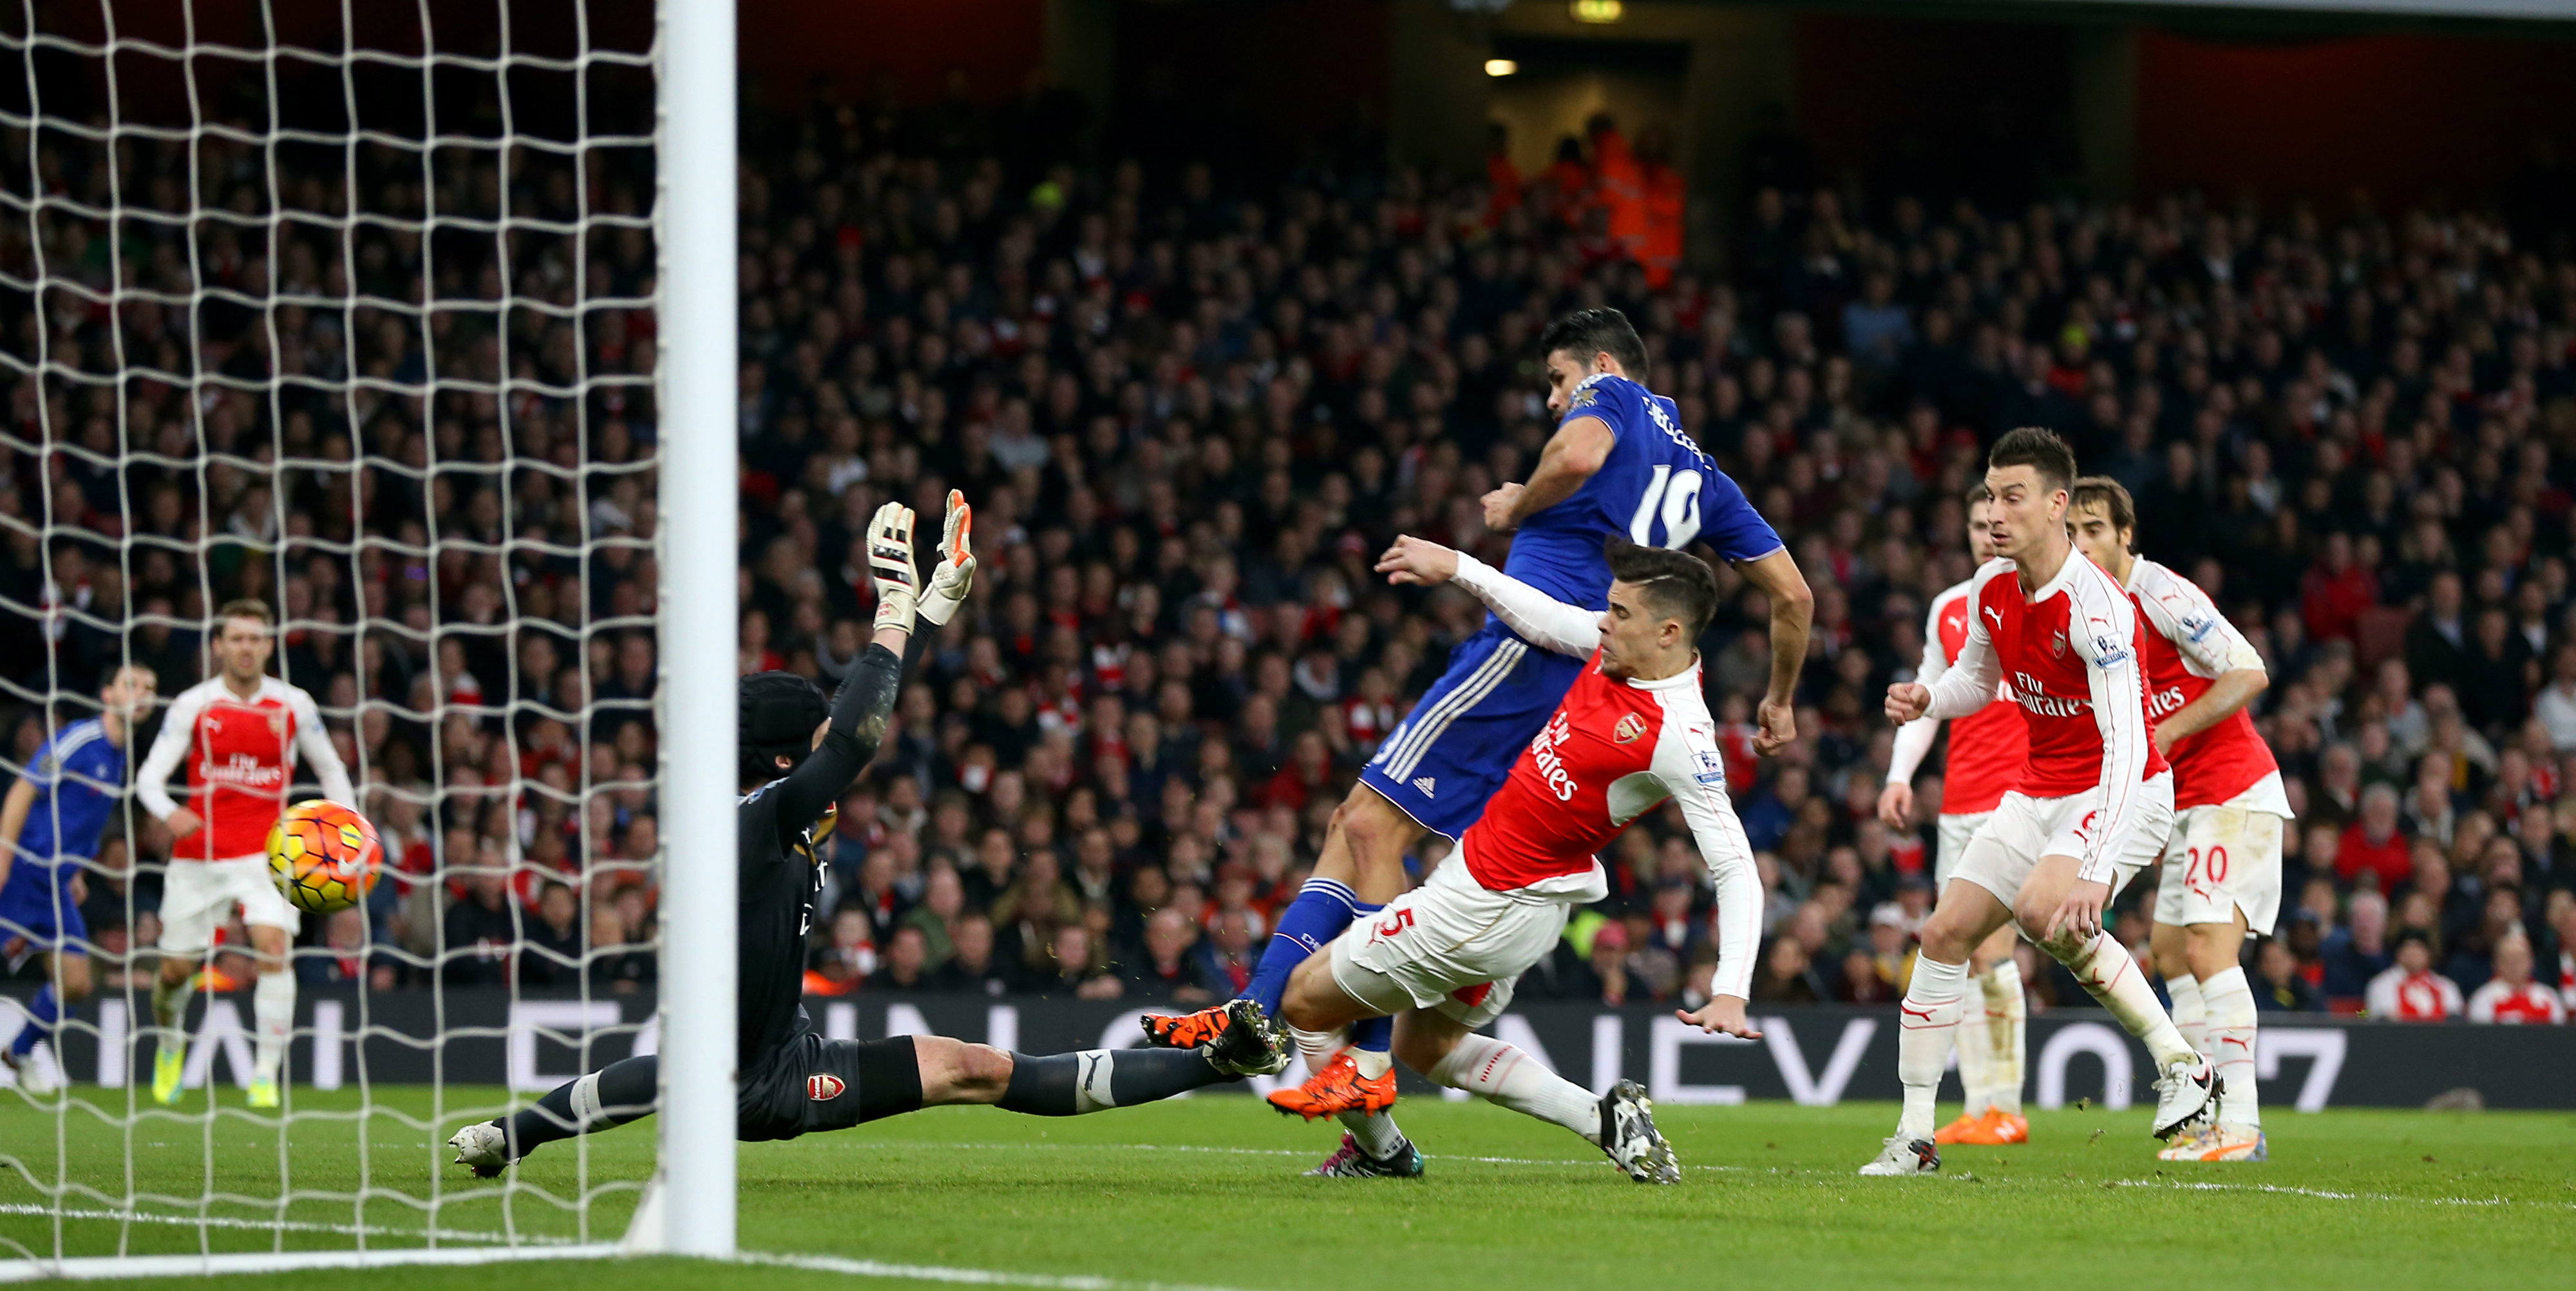 Diego Costa's goal gave Chelsea another win against Arsenal last weekend